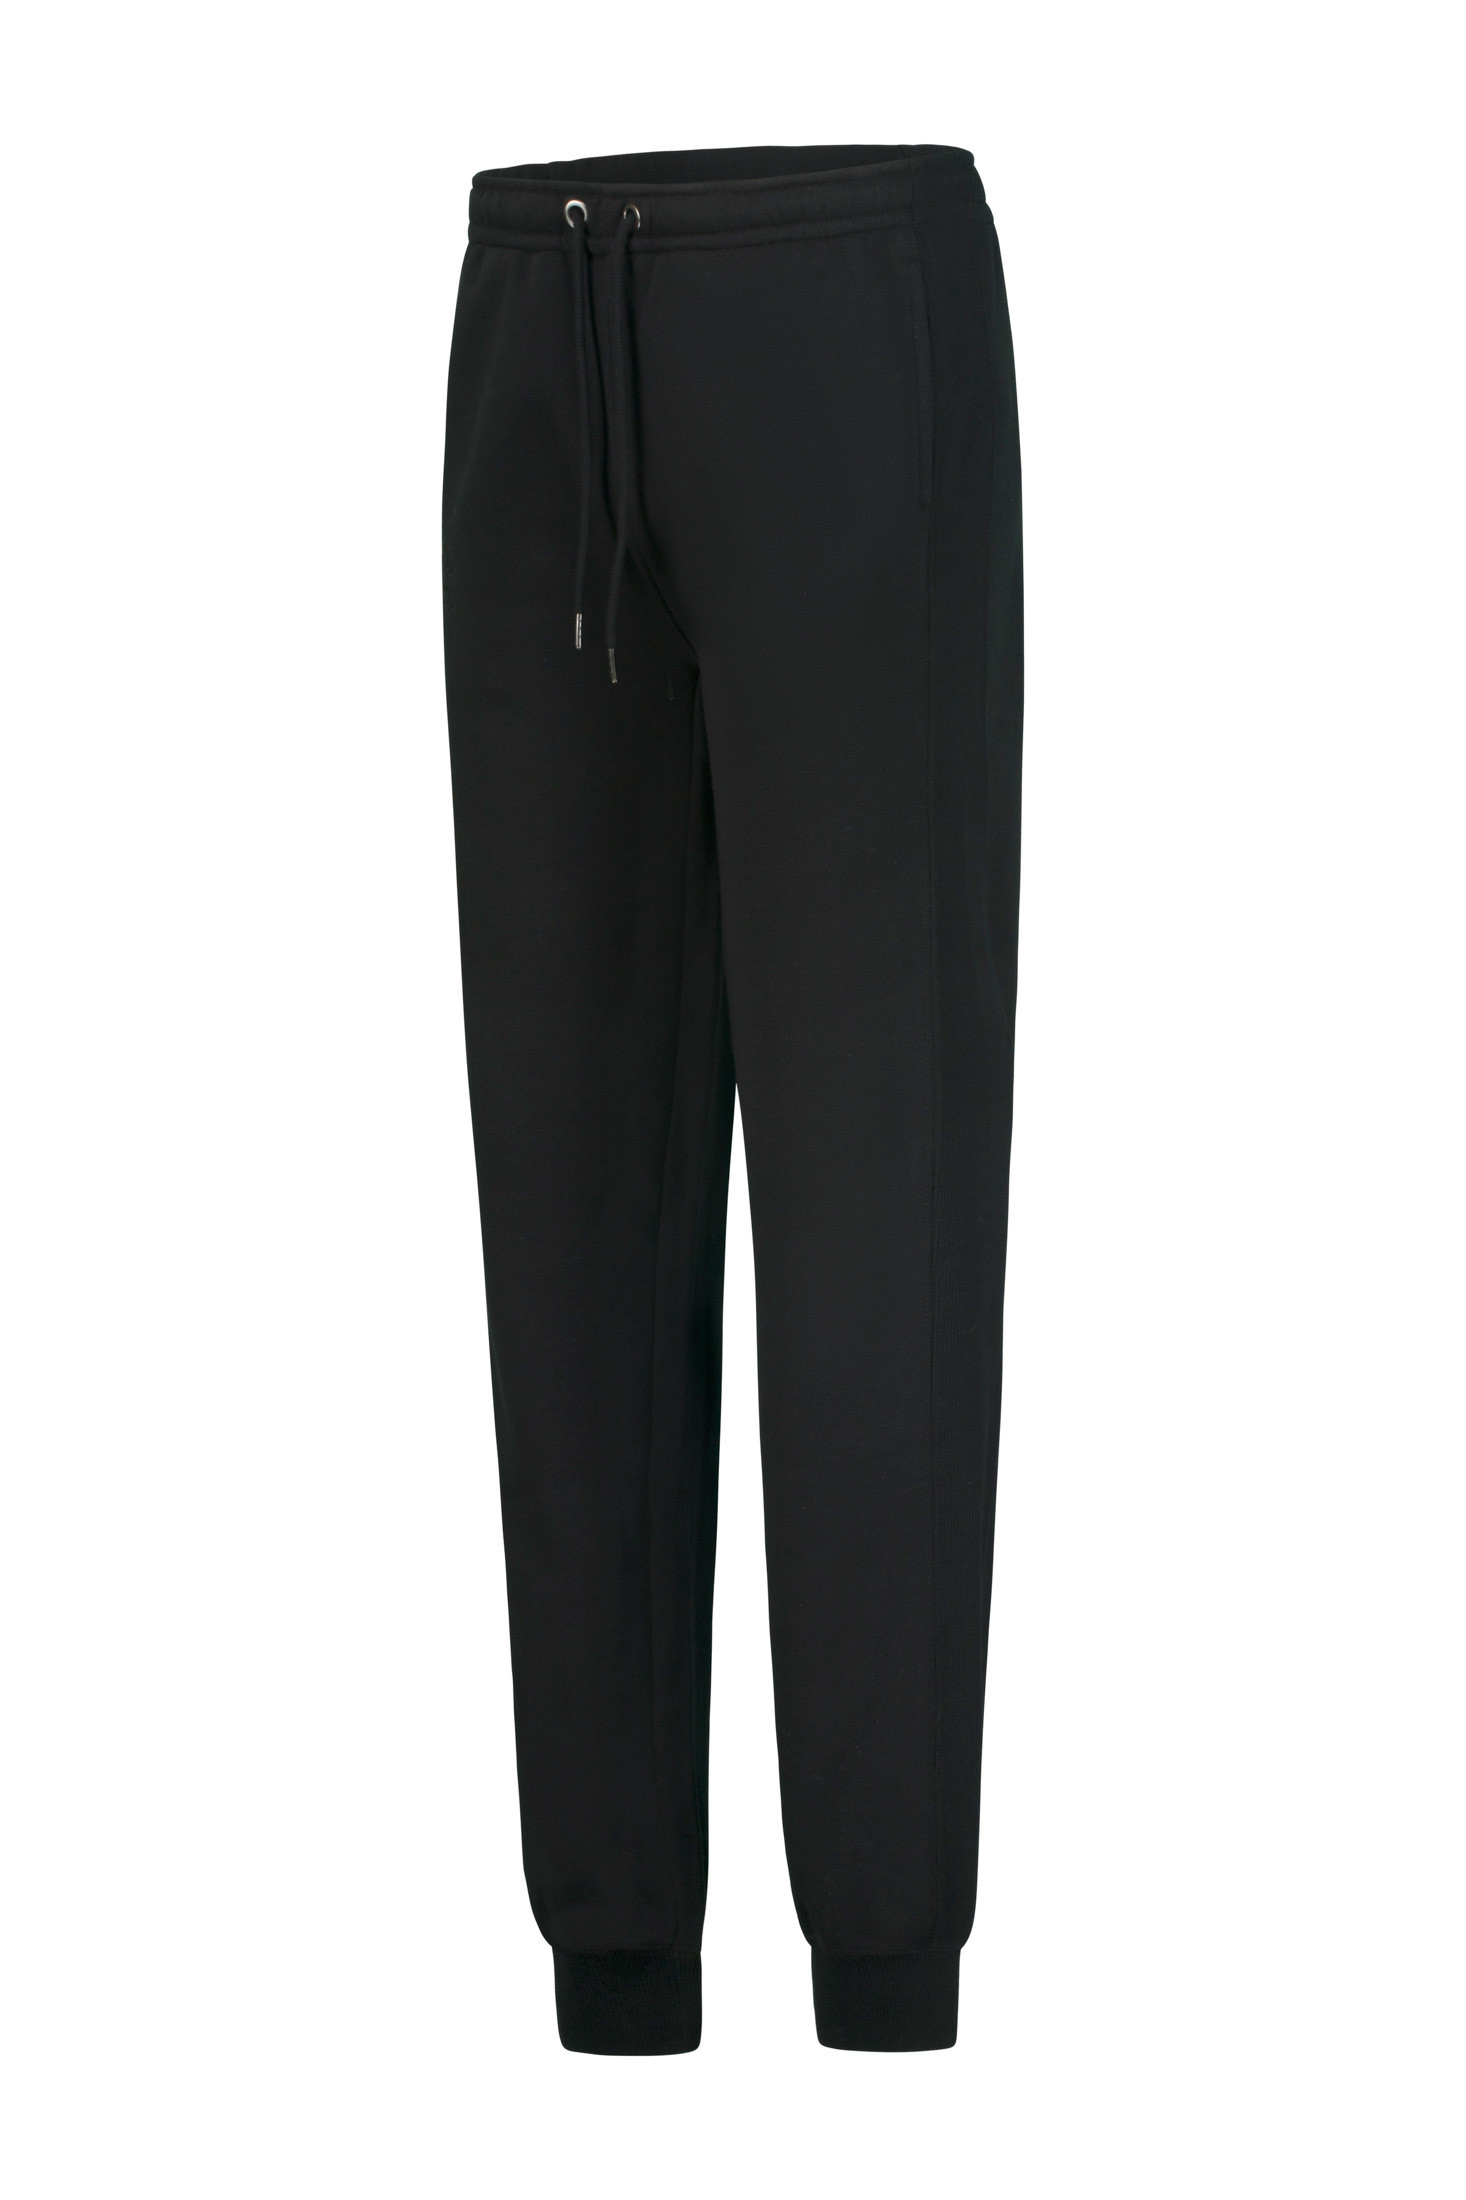 Russell Athletic - Jogger pants, Black, large image number 1